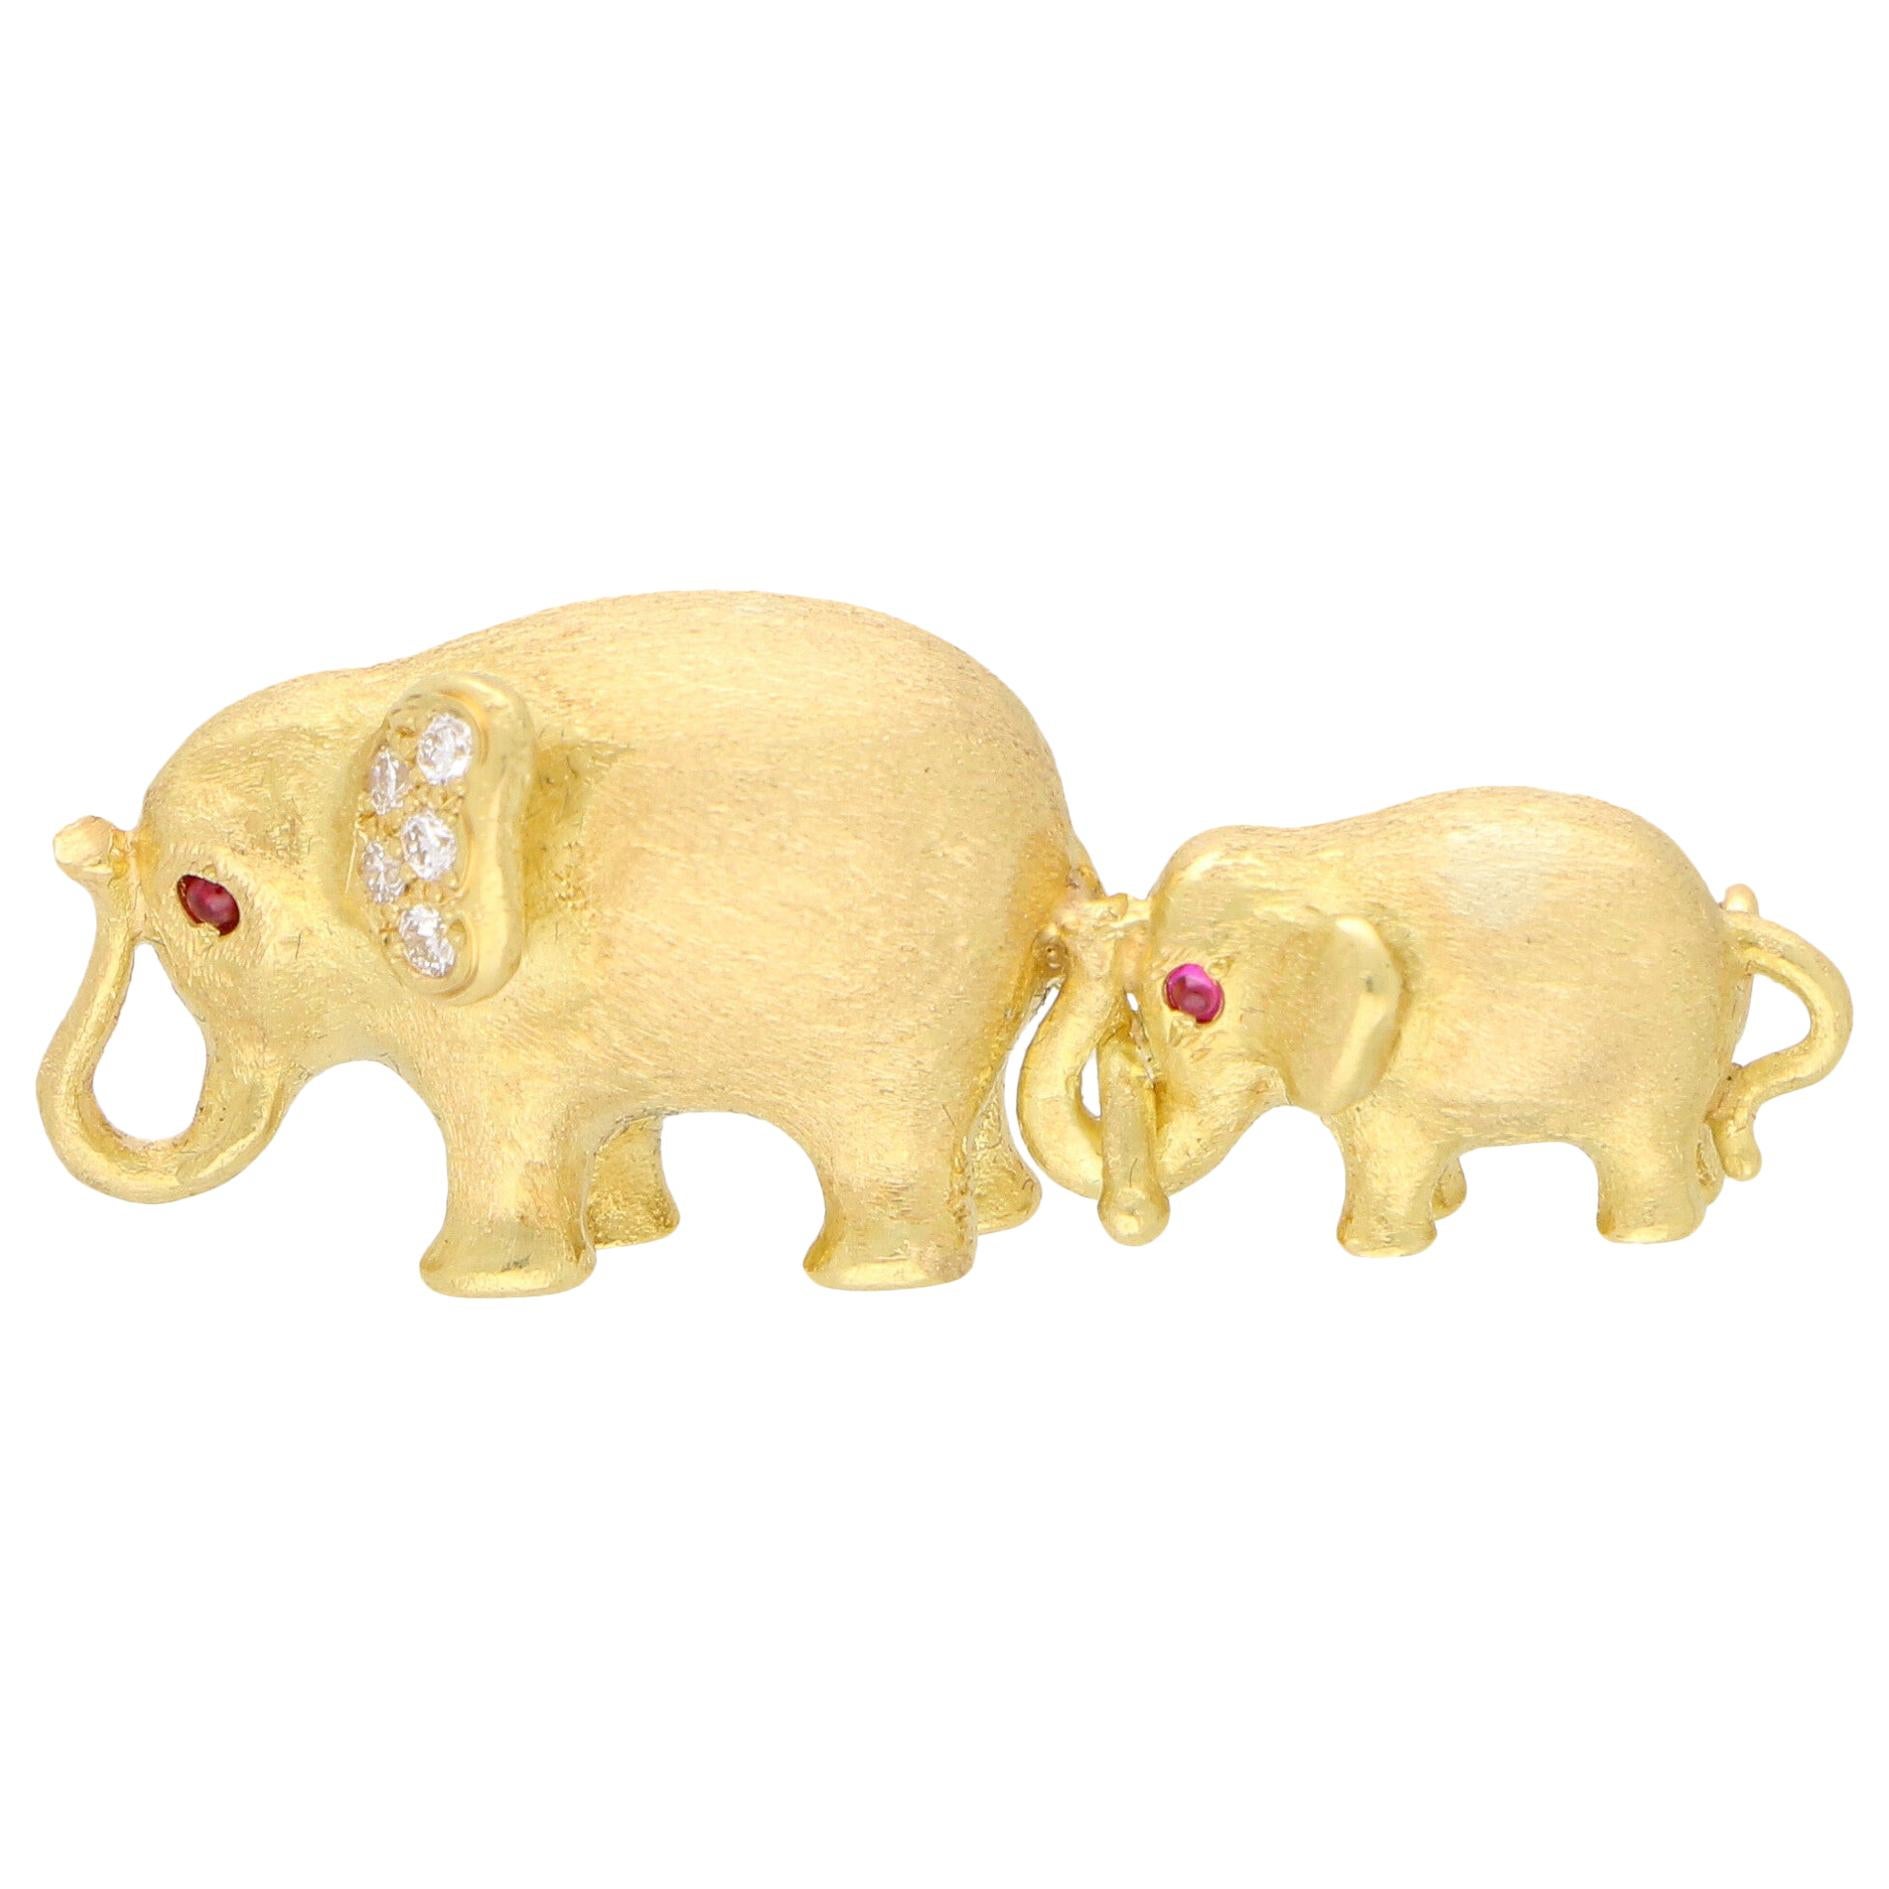 Ruby and Diamond Mother and Baby Elephant Brooch Set in 18 Karat Yellow Gold